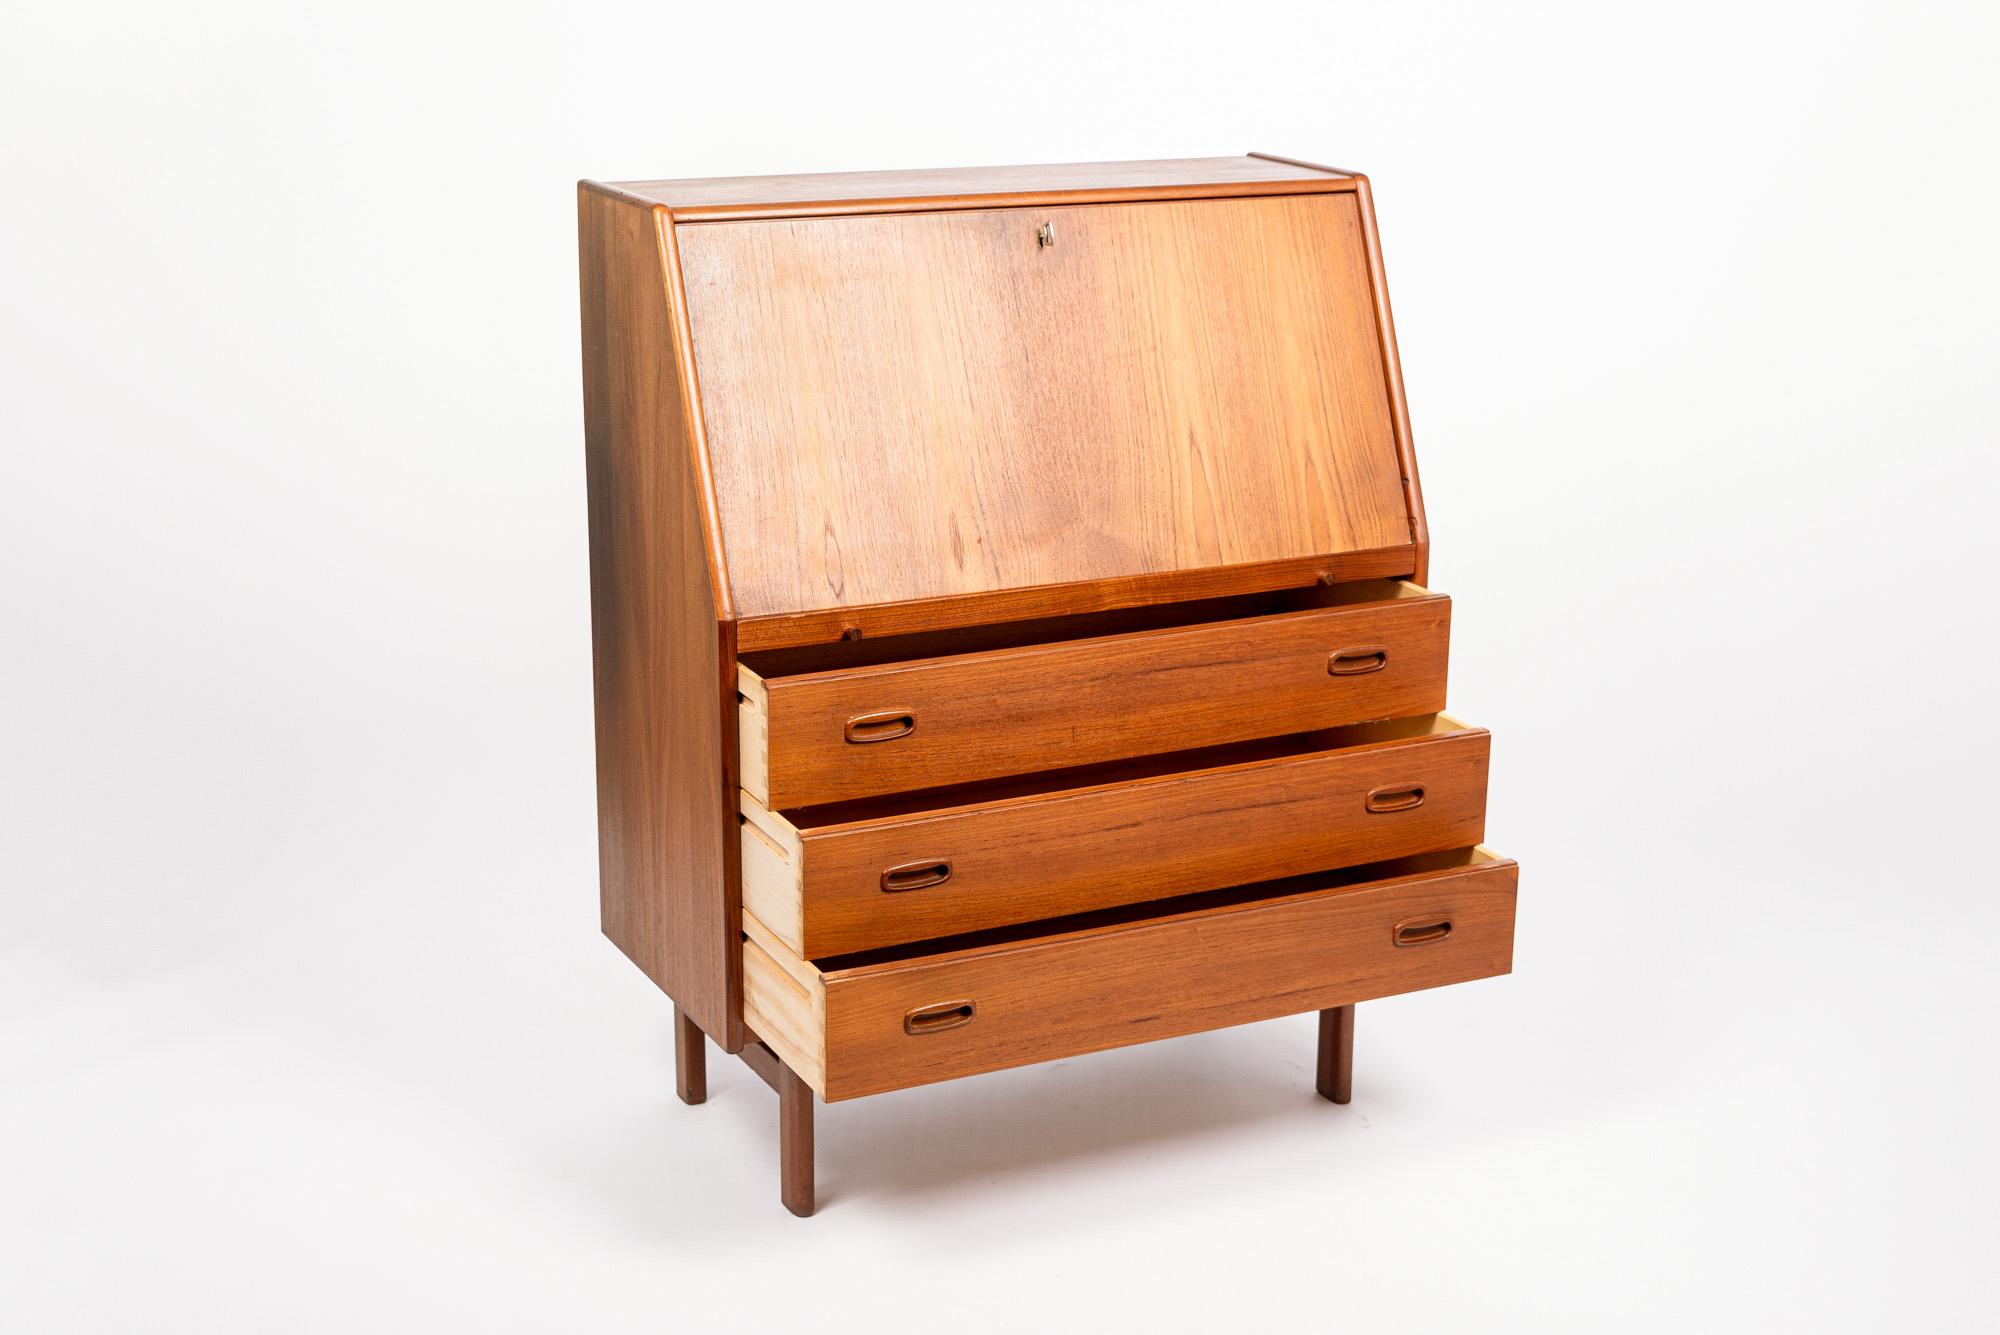 This mid century Danish modern teak wood secretary desk by Bernhard Petersen & Son for BPS Mobler was made in Denmark circa 1960. The classic Scandinavian modern design has clean, minimalist lines and gentle curves and is well-crafted from teak